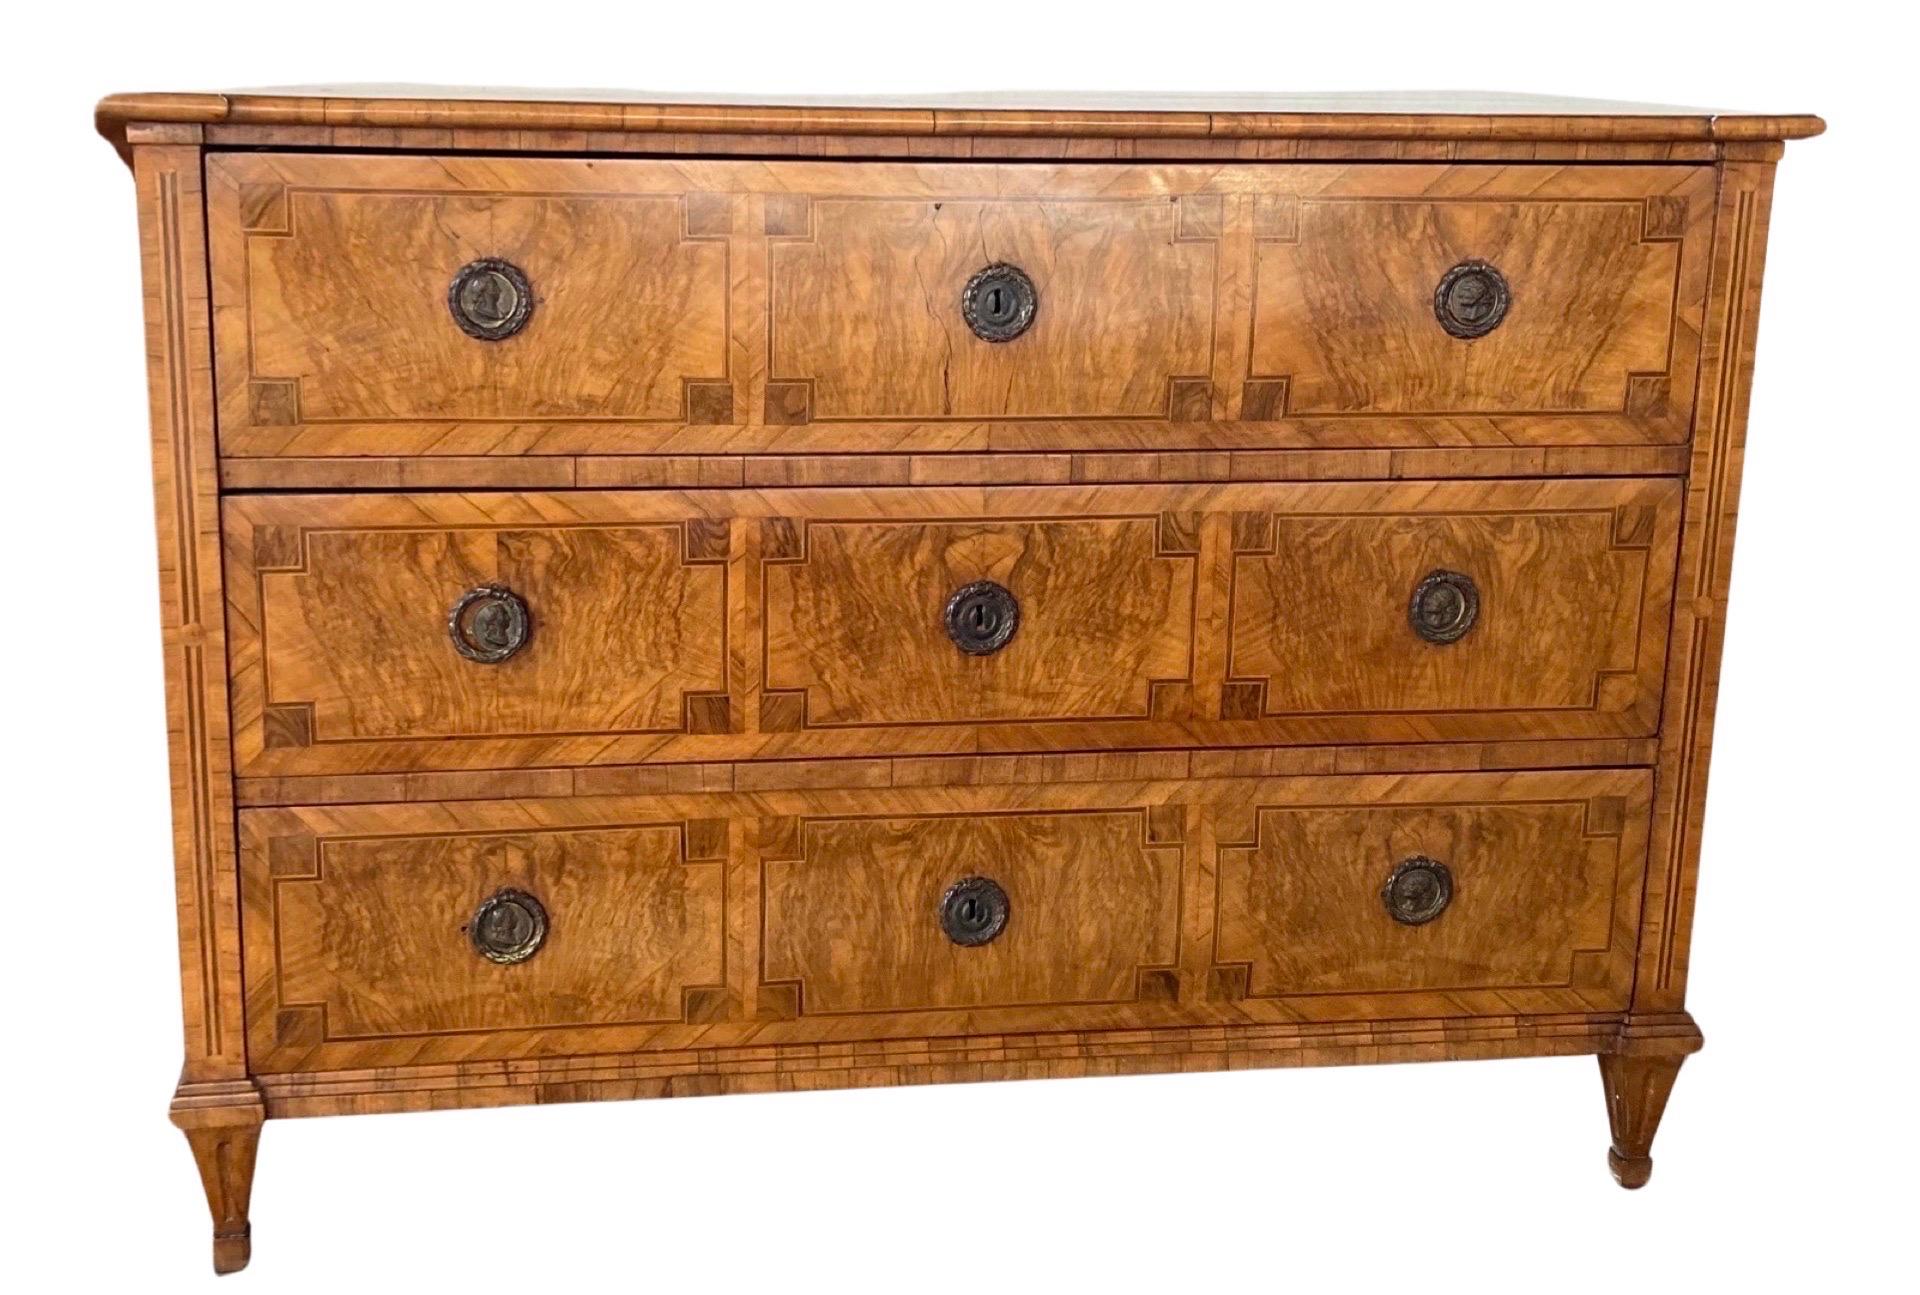 Commode hand-crafted in Austria or northern Italy in the late 1700s using walnut. The commode has very straight lines and features three inset drawers, all with hand-made dovetail joints and beautifully decorated drawer fronts. The drawers all work